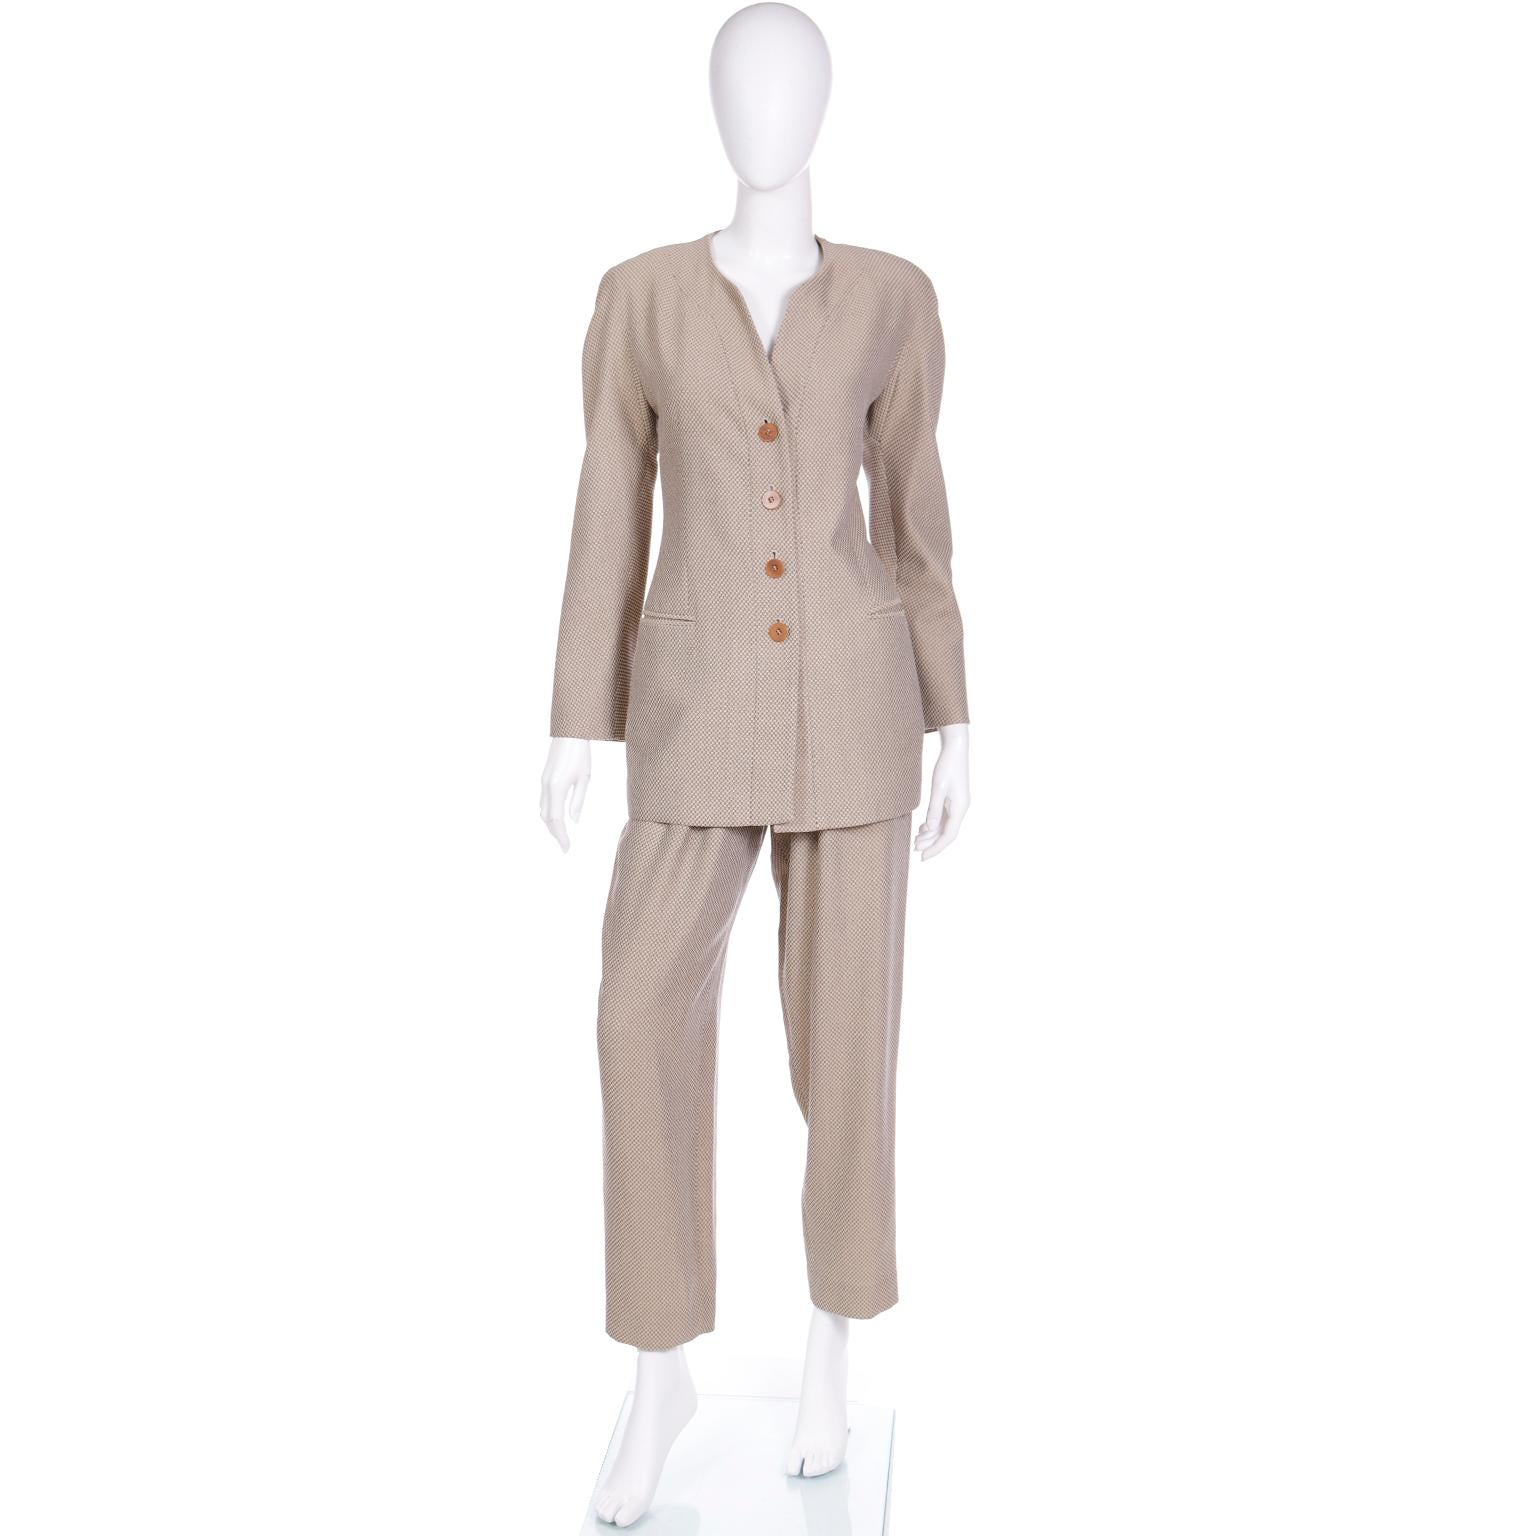 This is a fabulous vintage Giorgio Armani Le Collezioni suit that is in a beige and grey Toned check wool blend fabric. This outfit is a great example of the timeless appeal of Giorgio Armani and we love the way it can seamlessly blend into a modern